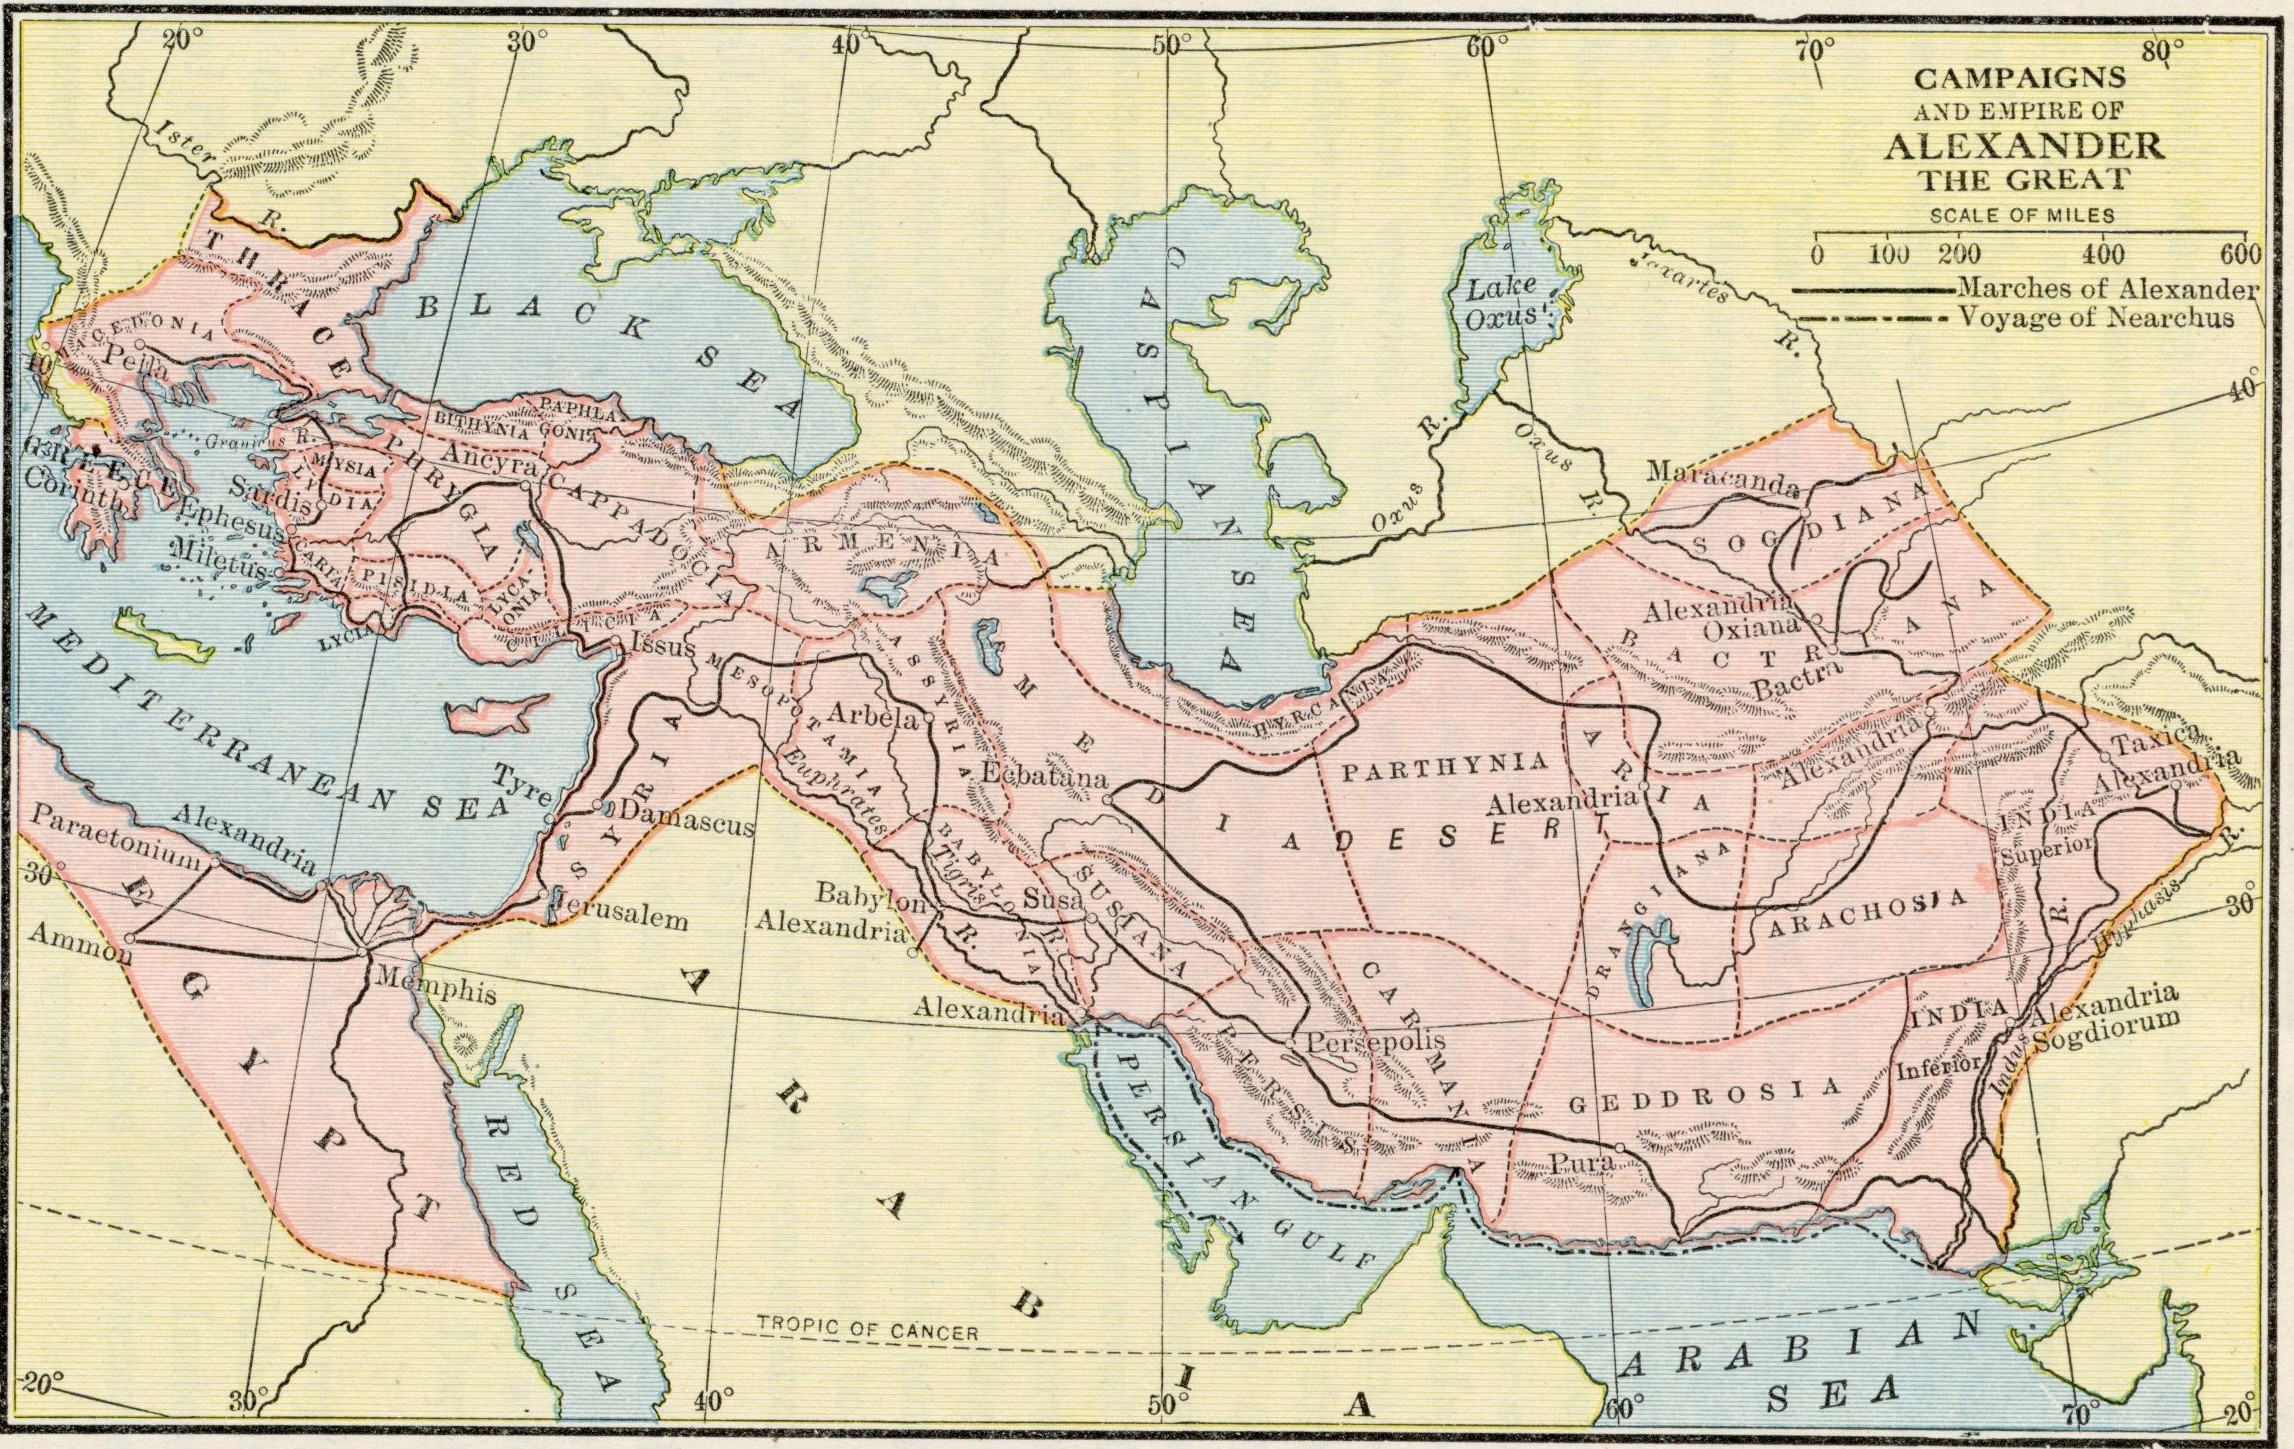 Campaigns and Empire of Alexander the Great